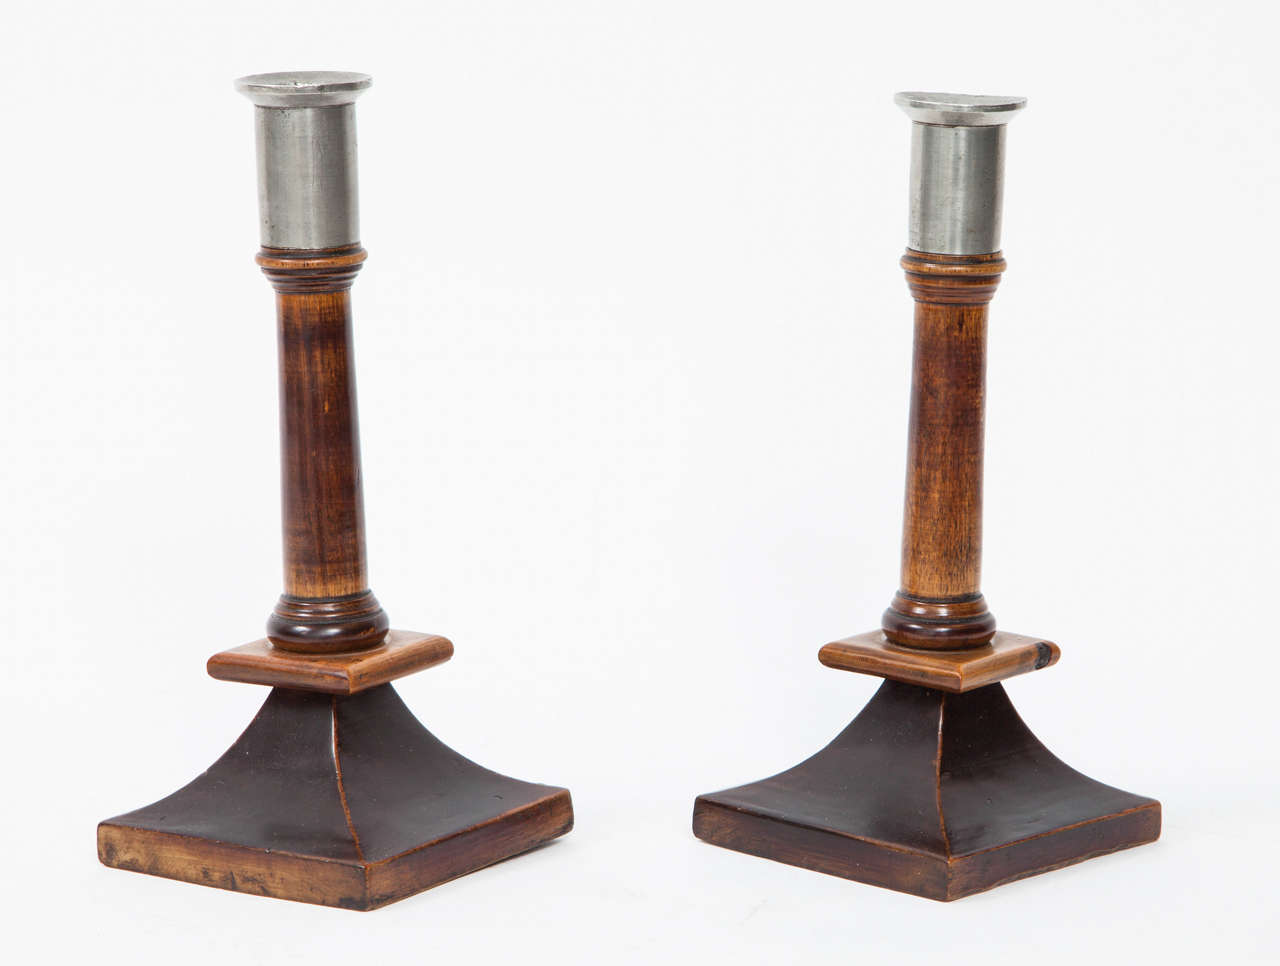 A pair of Swedish birch, stained birch and pewter candlesticks, Late 19th Century, of classic form with tapered square base and pewter candle holders.